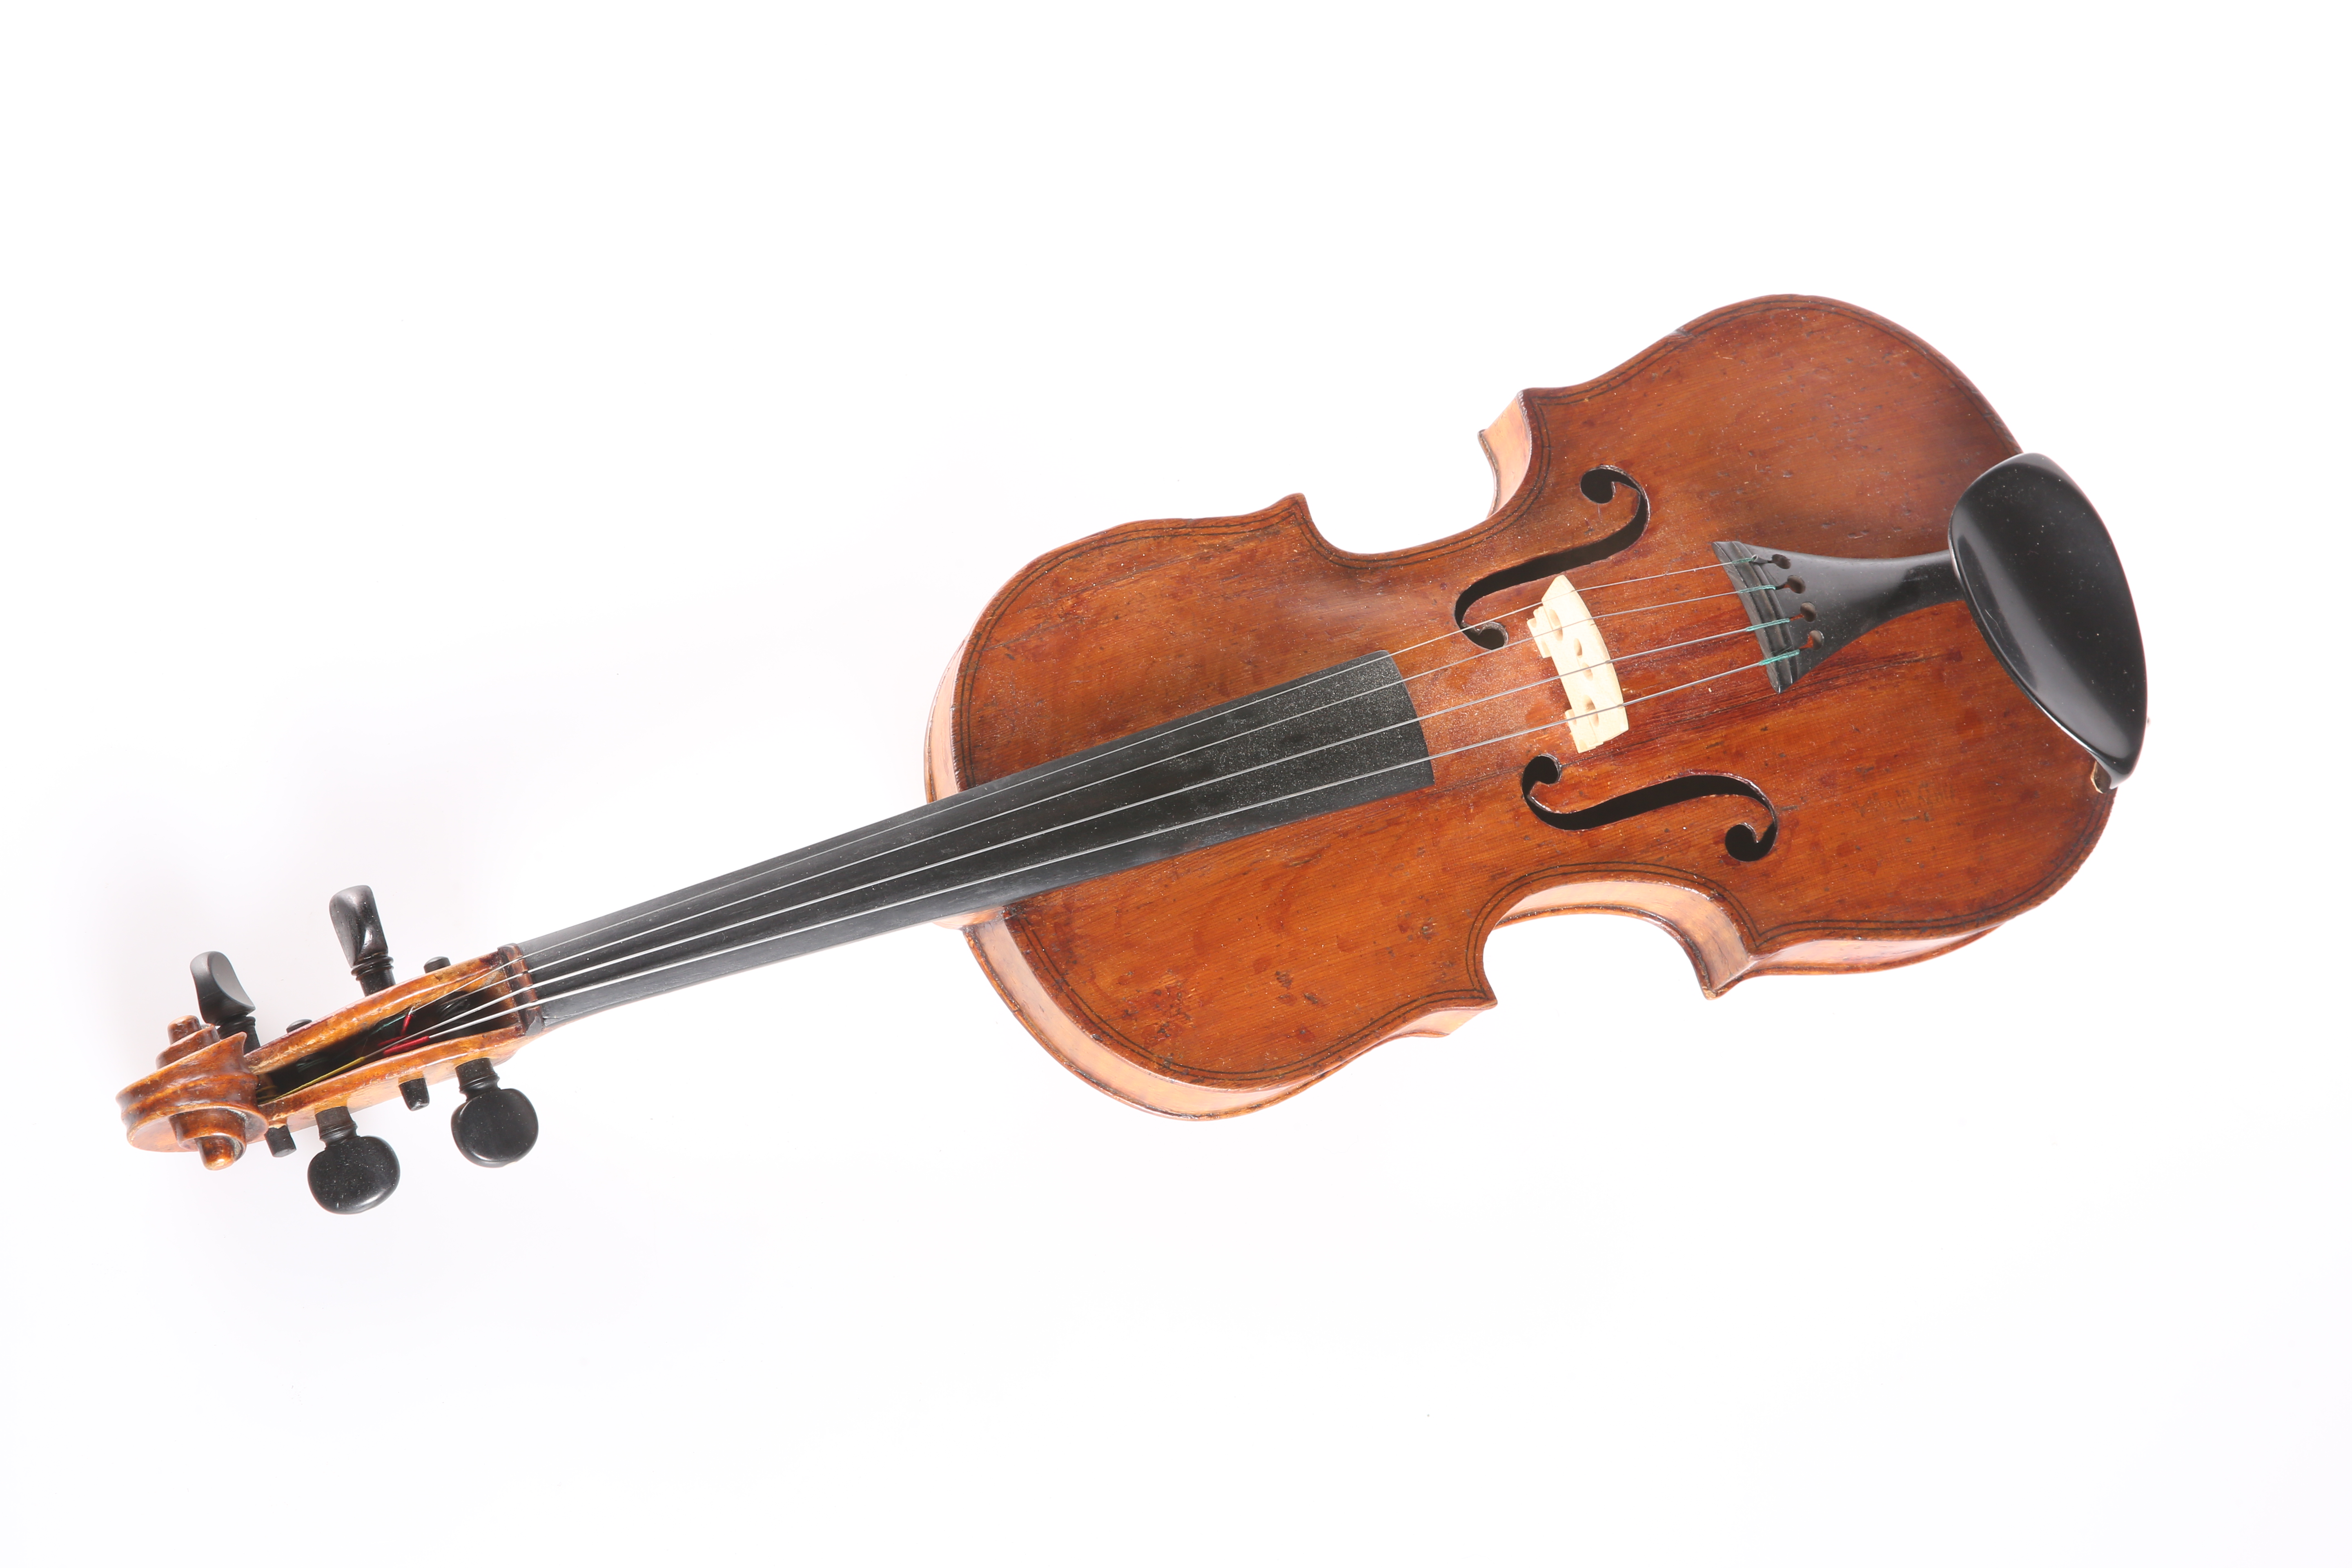 A 14.15" BODY VIOLIN OF THE EARLY 20TH CENTURY OF EUROPEAN MANUFACTURE - Image 3 of 3